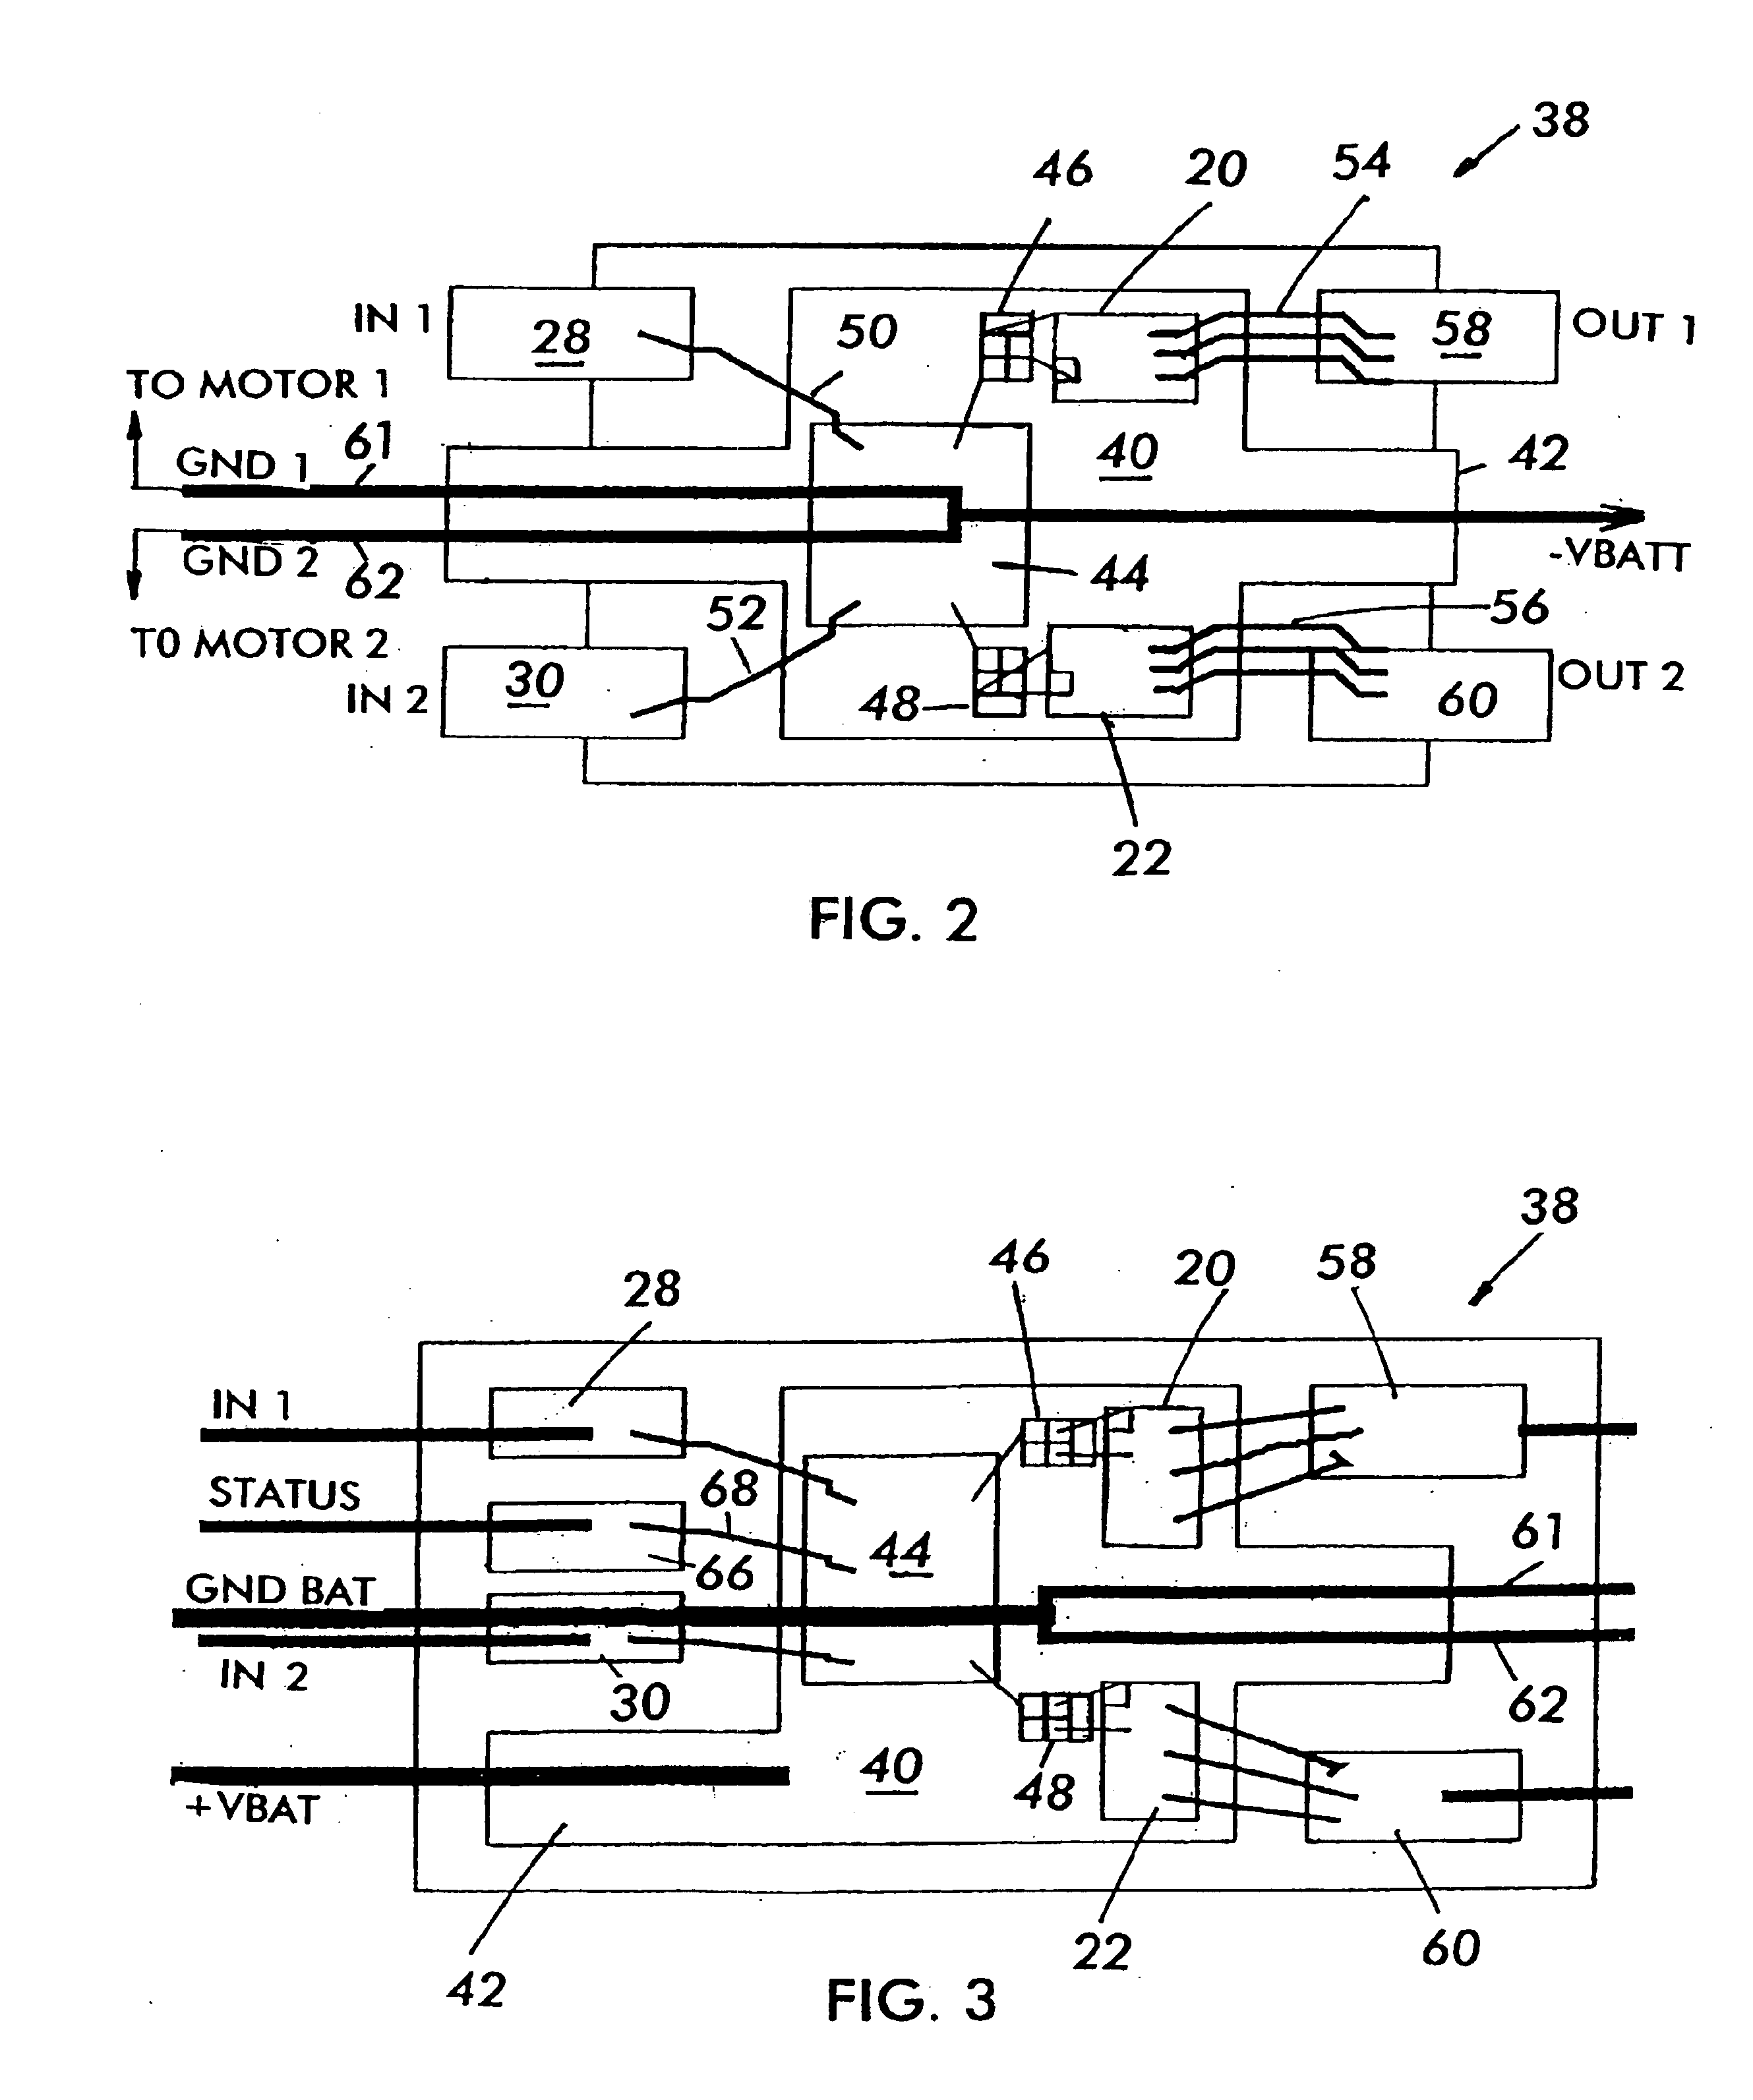 Fan control circuit and package